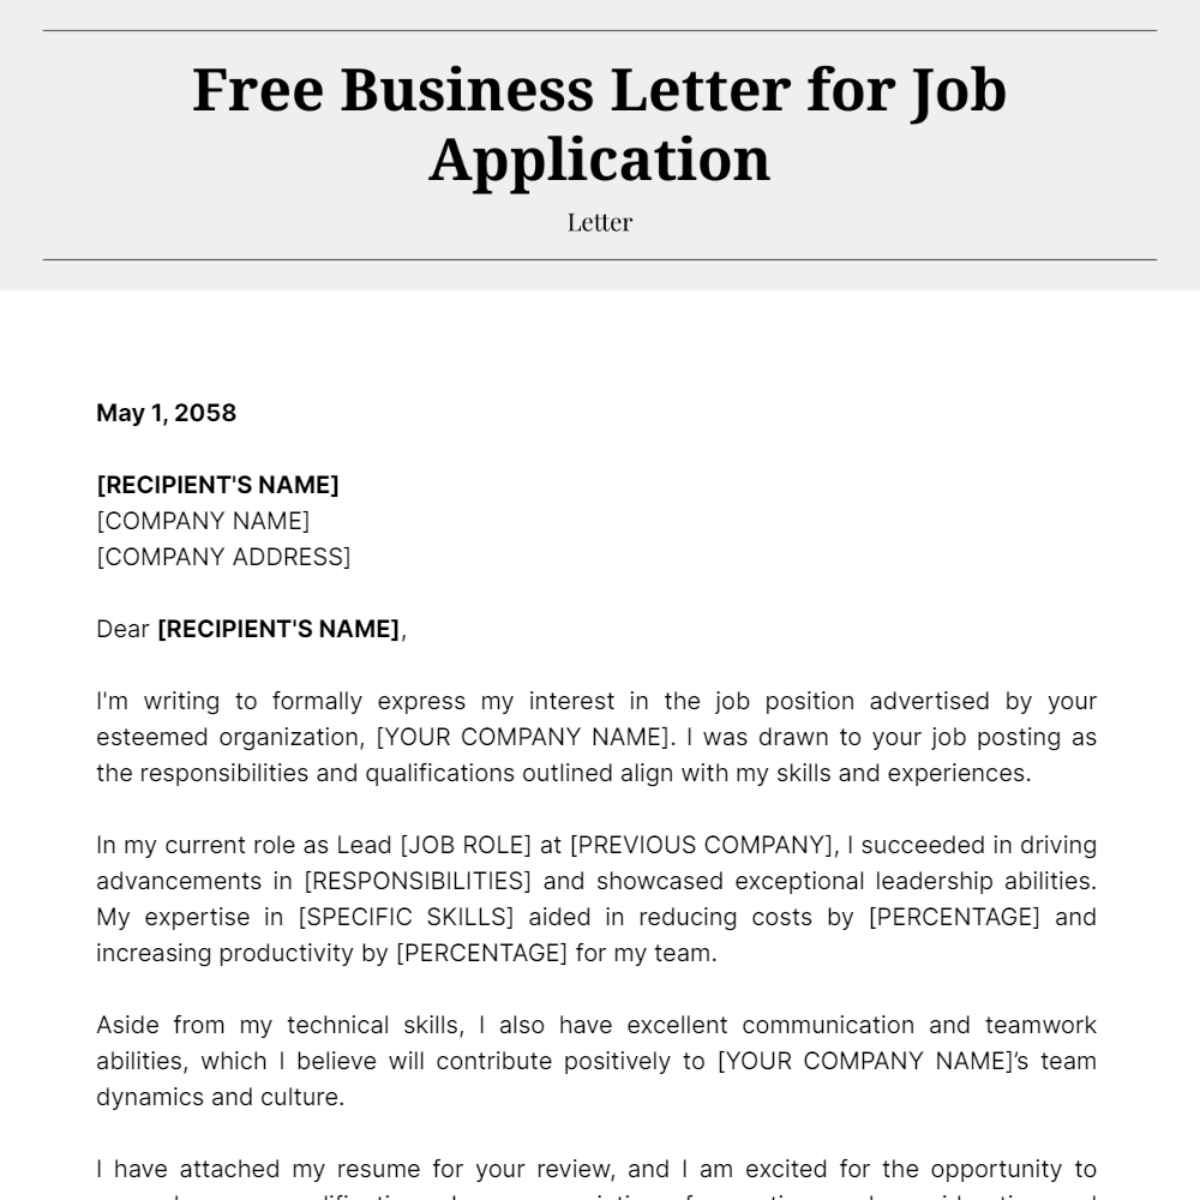 Business Letter for Job Application Template